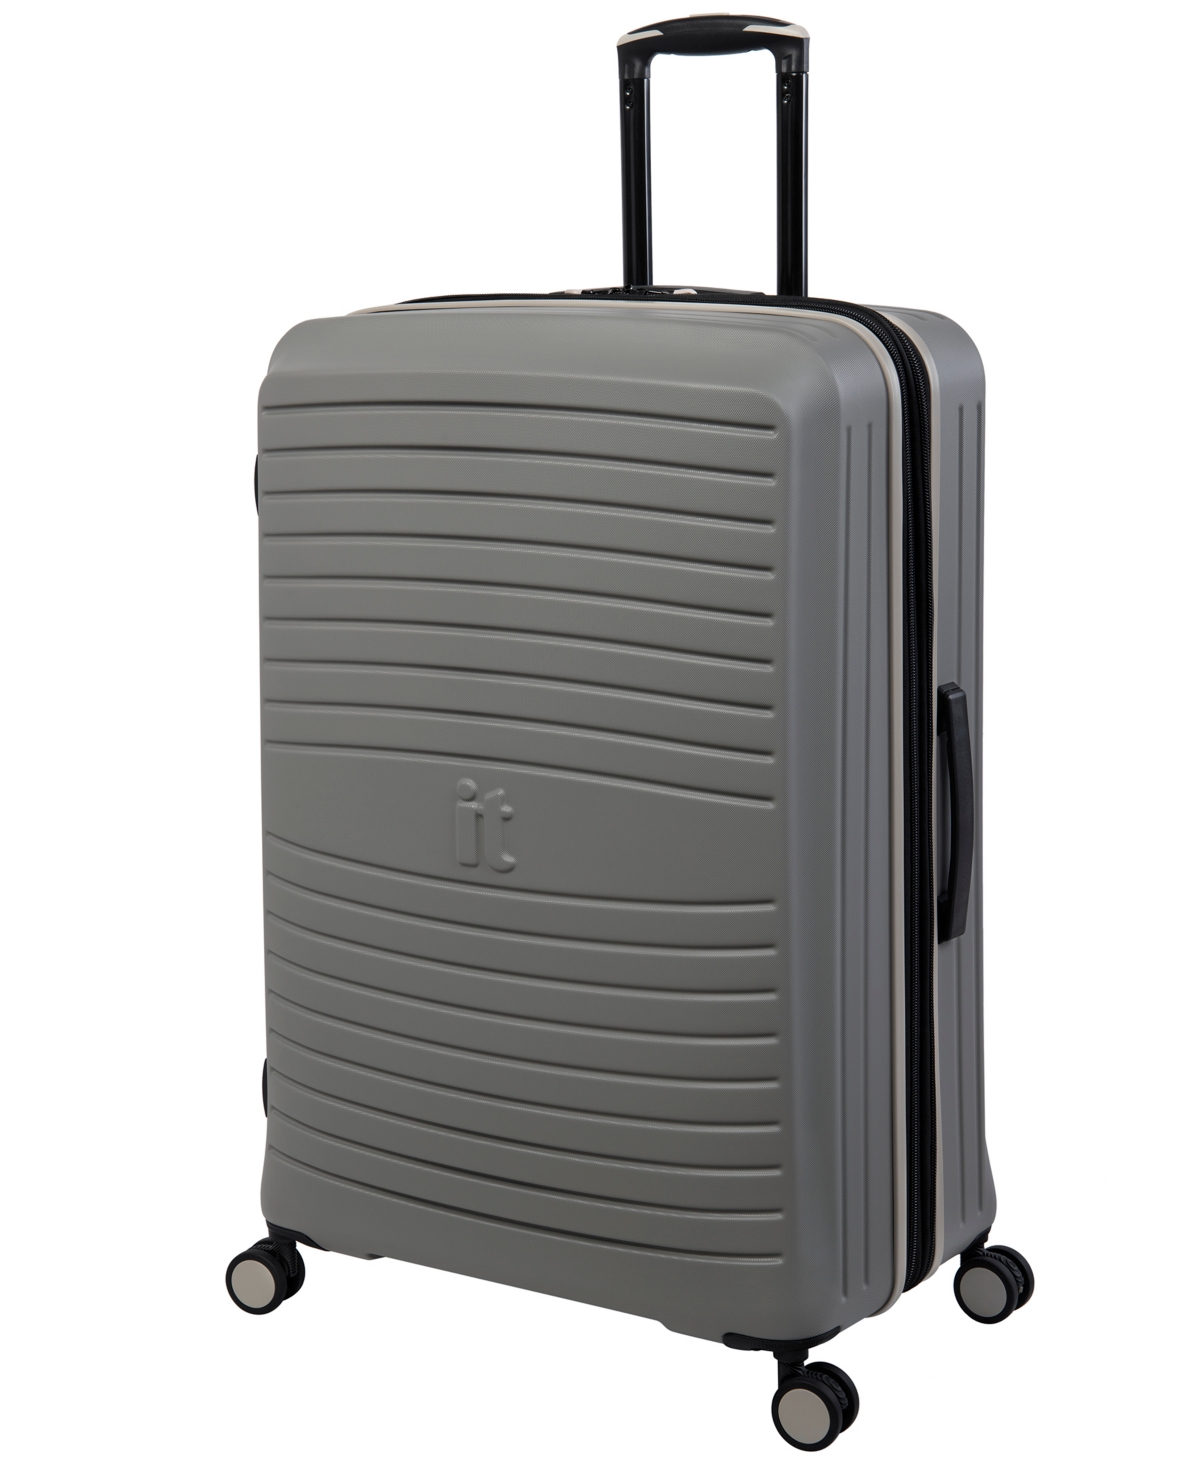 It Luggage 19" Hardside 8-wheel Expandable Spinner Carry-on Luggage In Grayskin